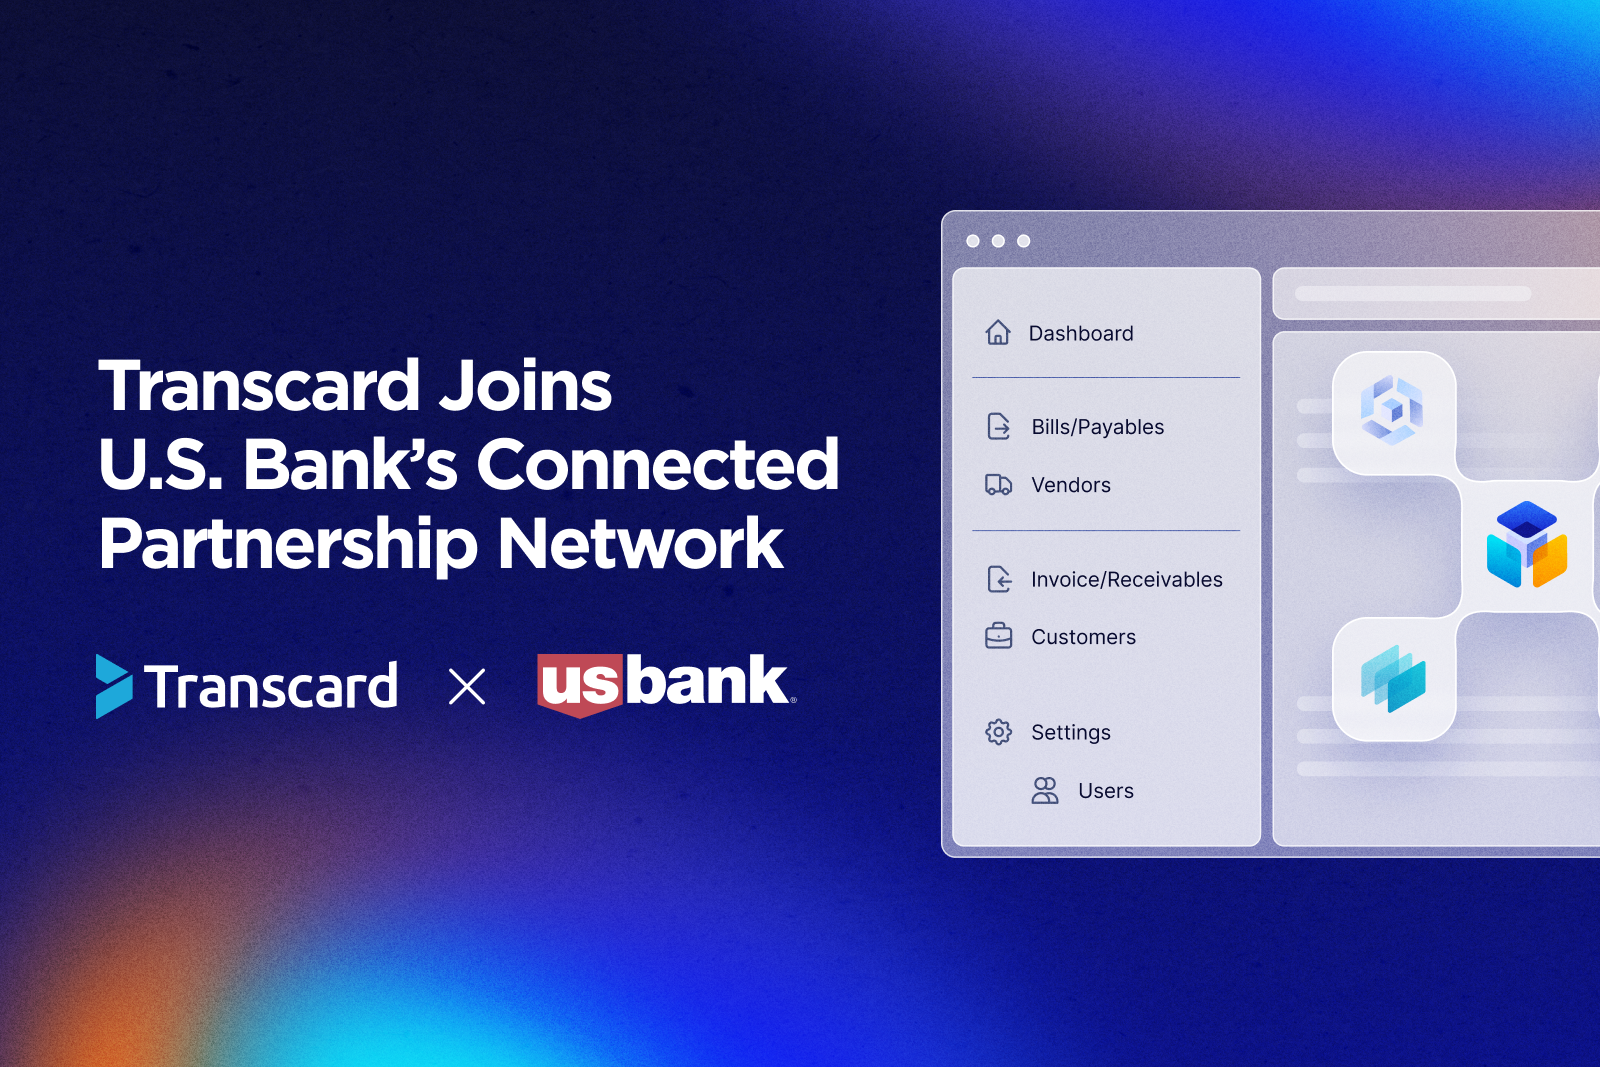 transcard joins us bank network